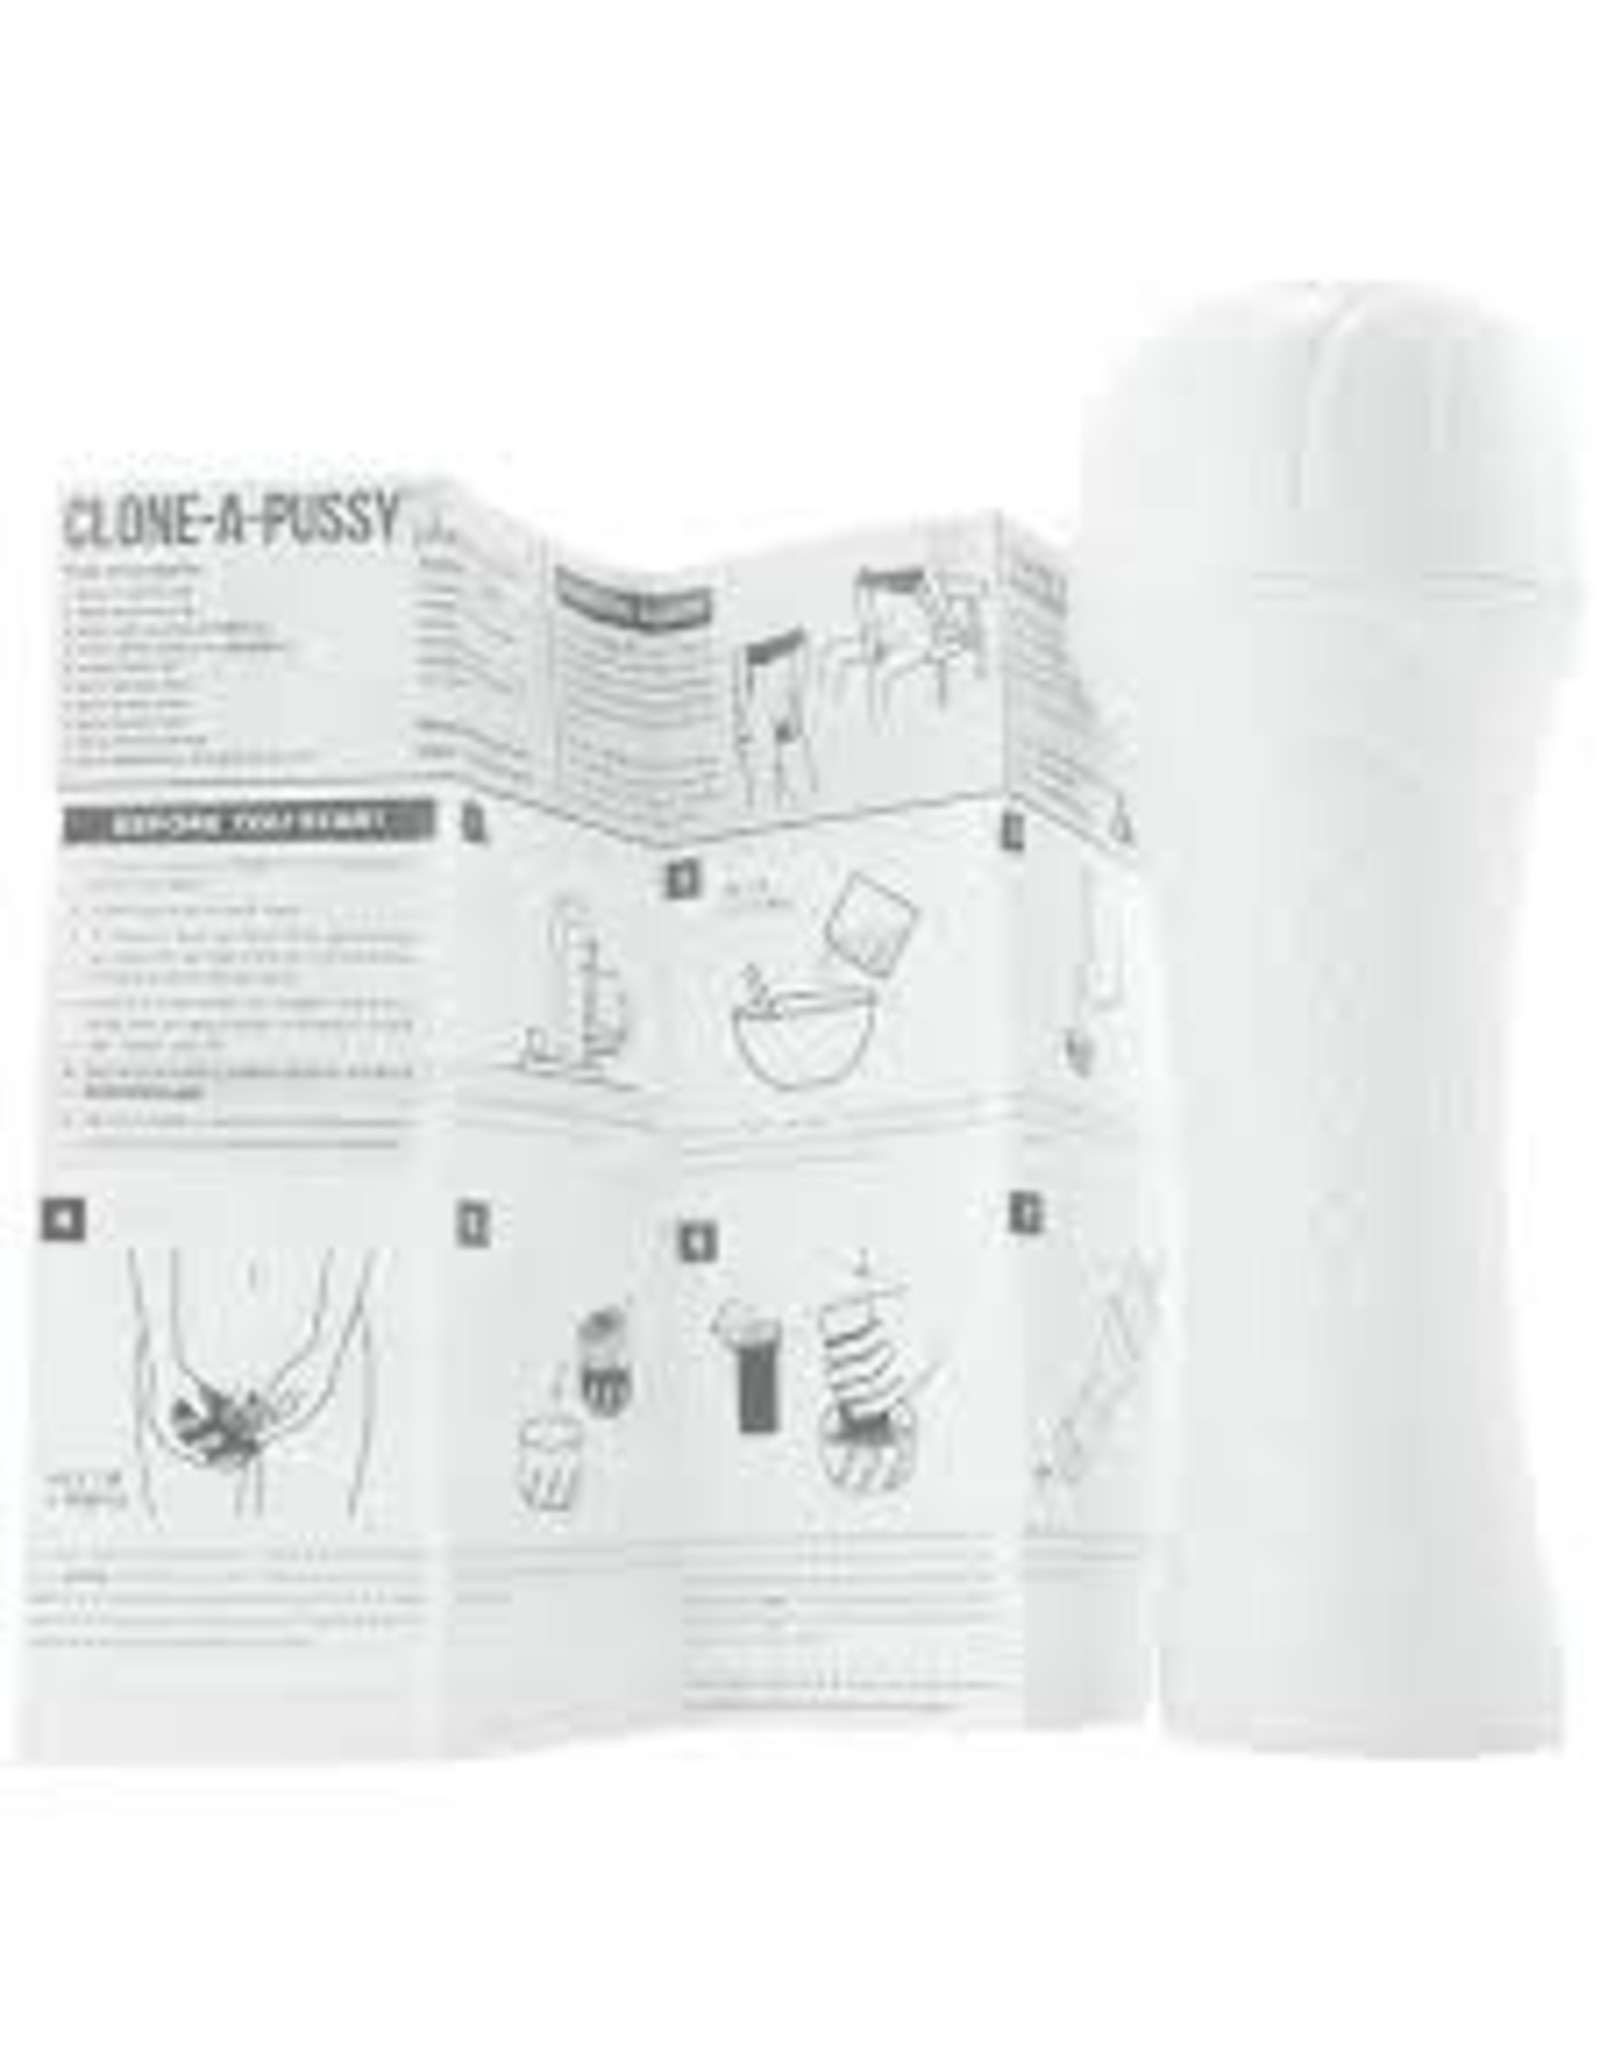 Empire Labs Clone-A-Pussy Plus Sleeve Kit